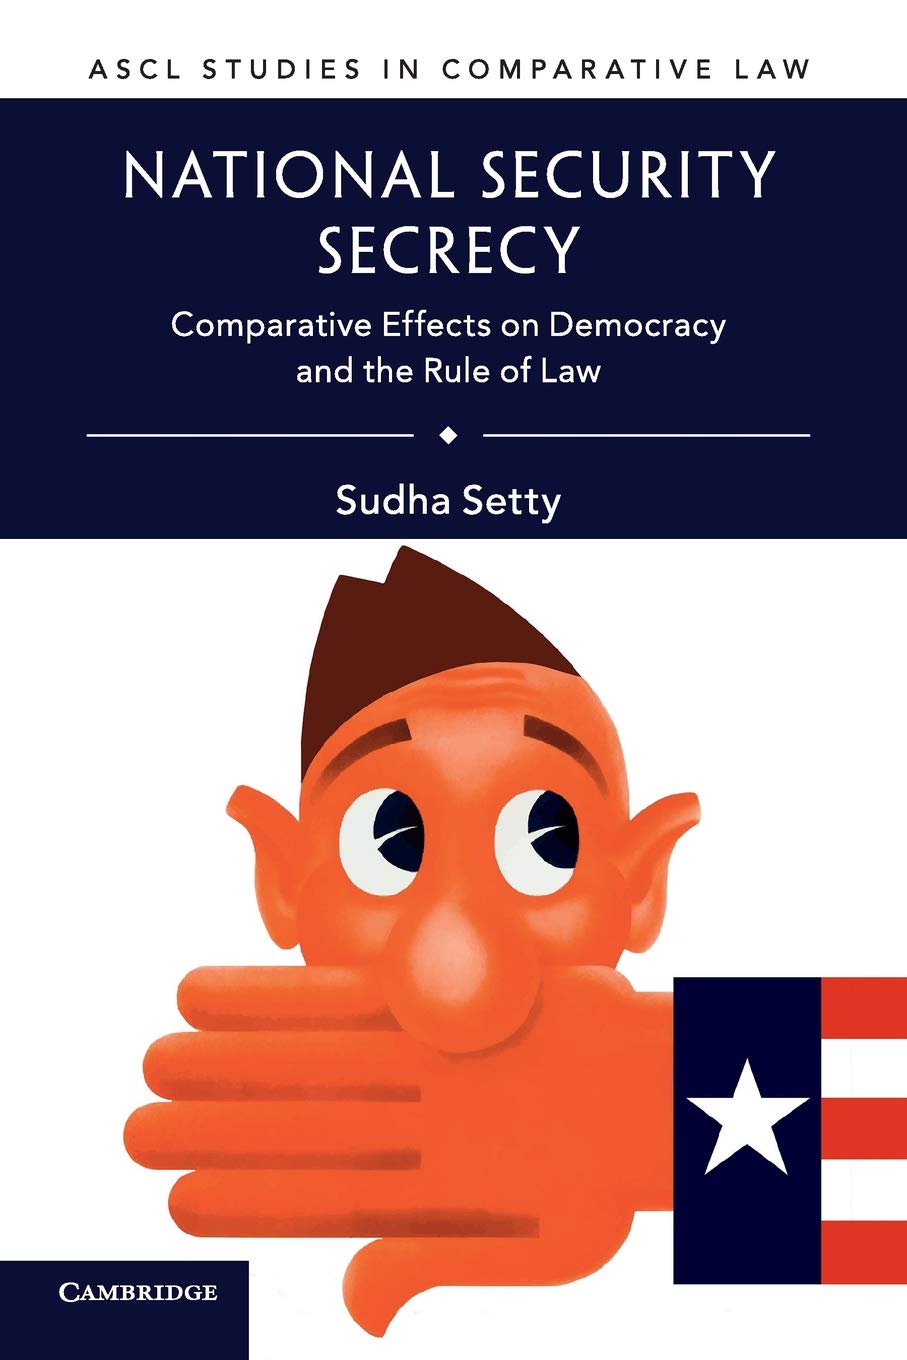 	NATIONAL SECURITY SECRECY: COMPARATIVE EFFECTS ON DEMOCRACY AND THE RULE OF LAW (ASCL STUDIES IN COMPARATIVE LAW)